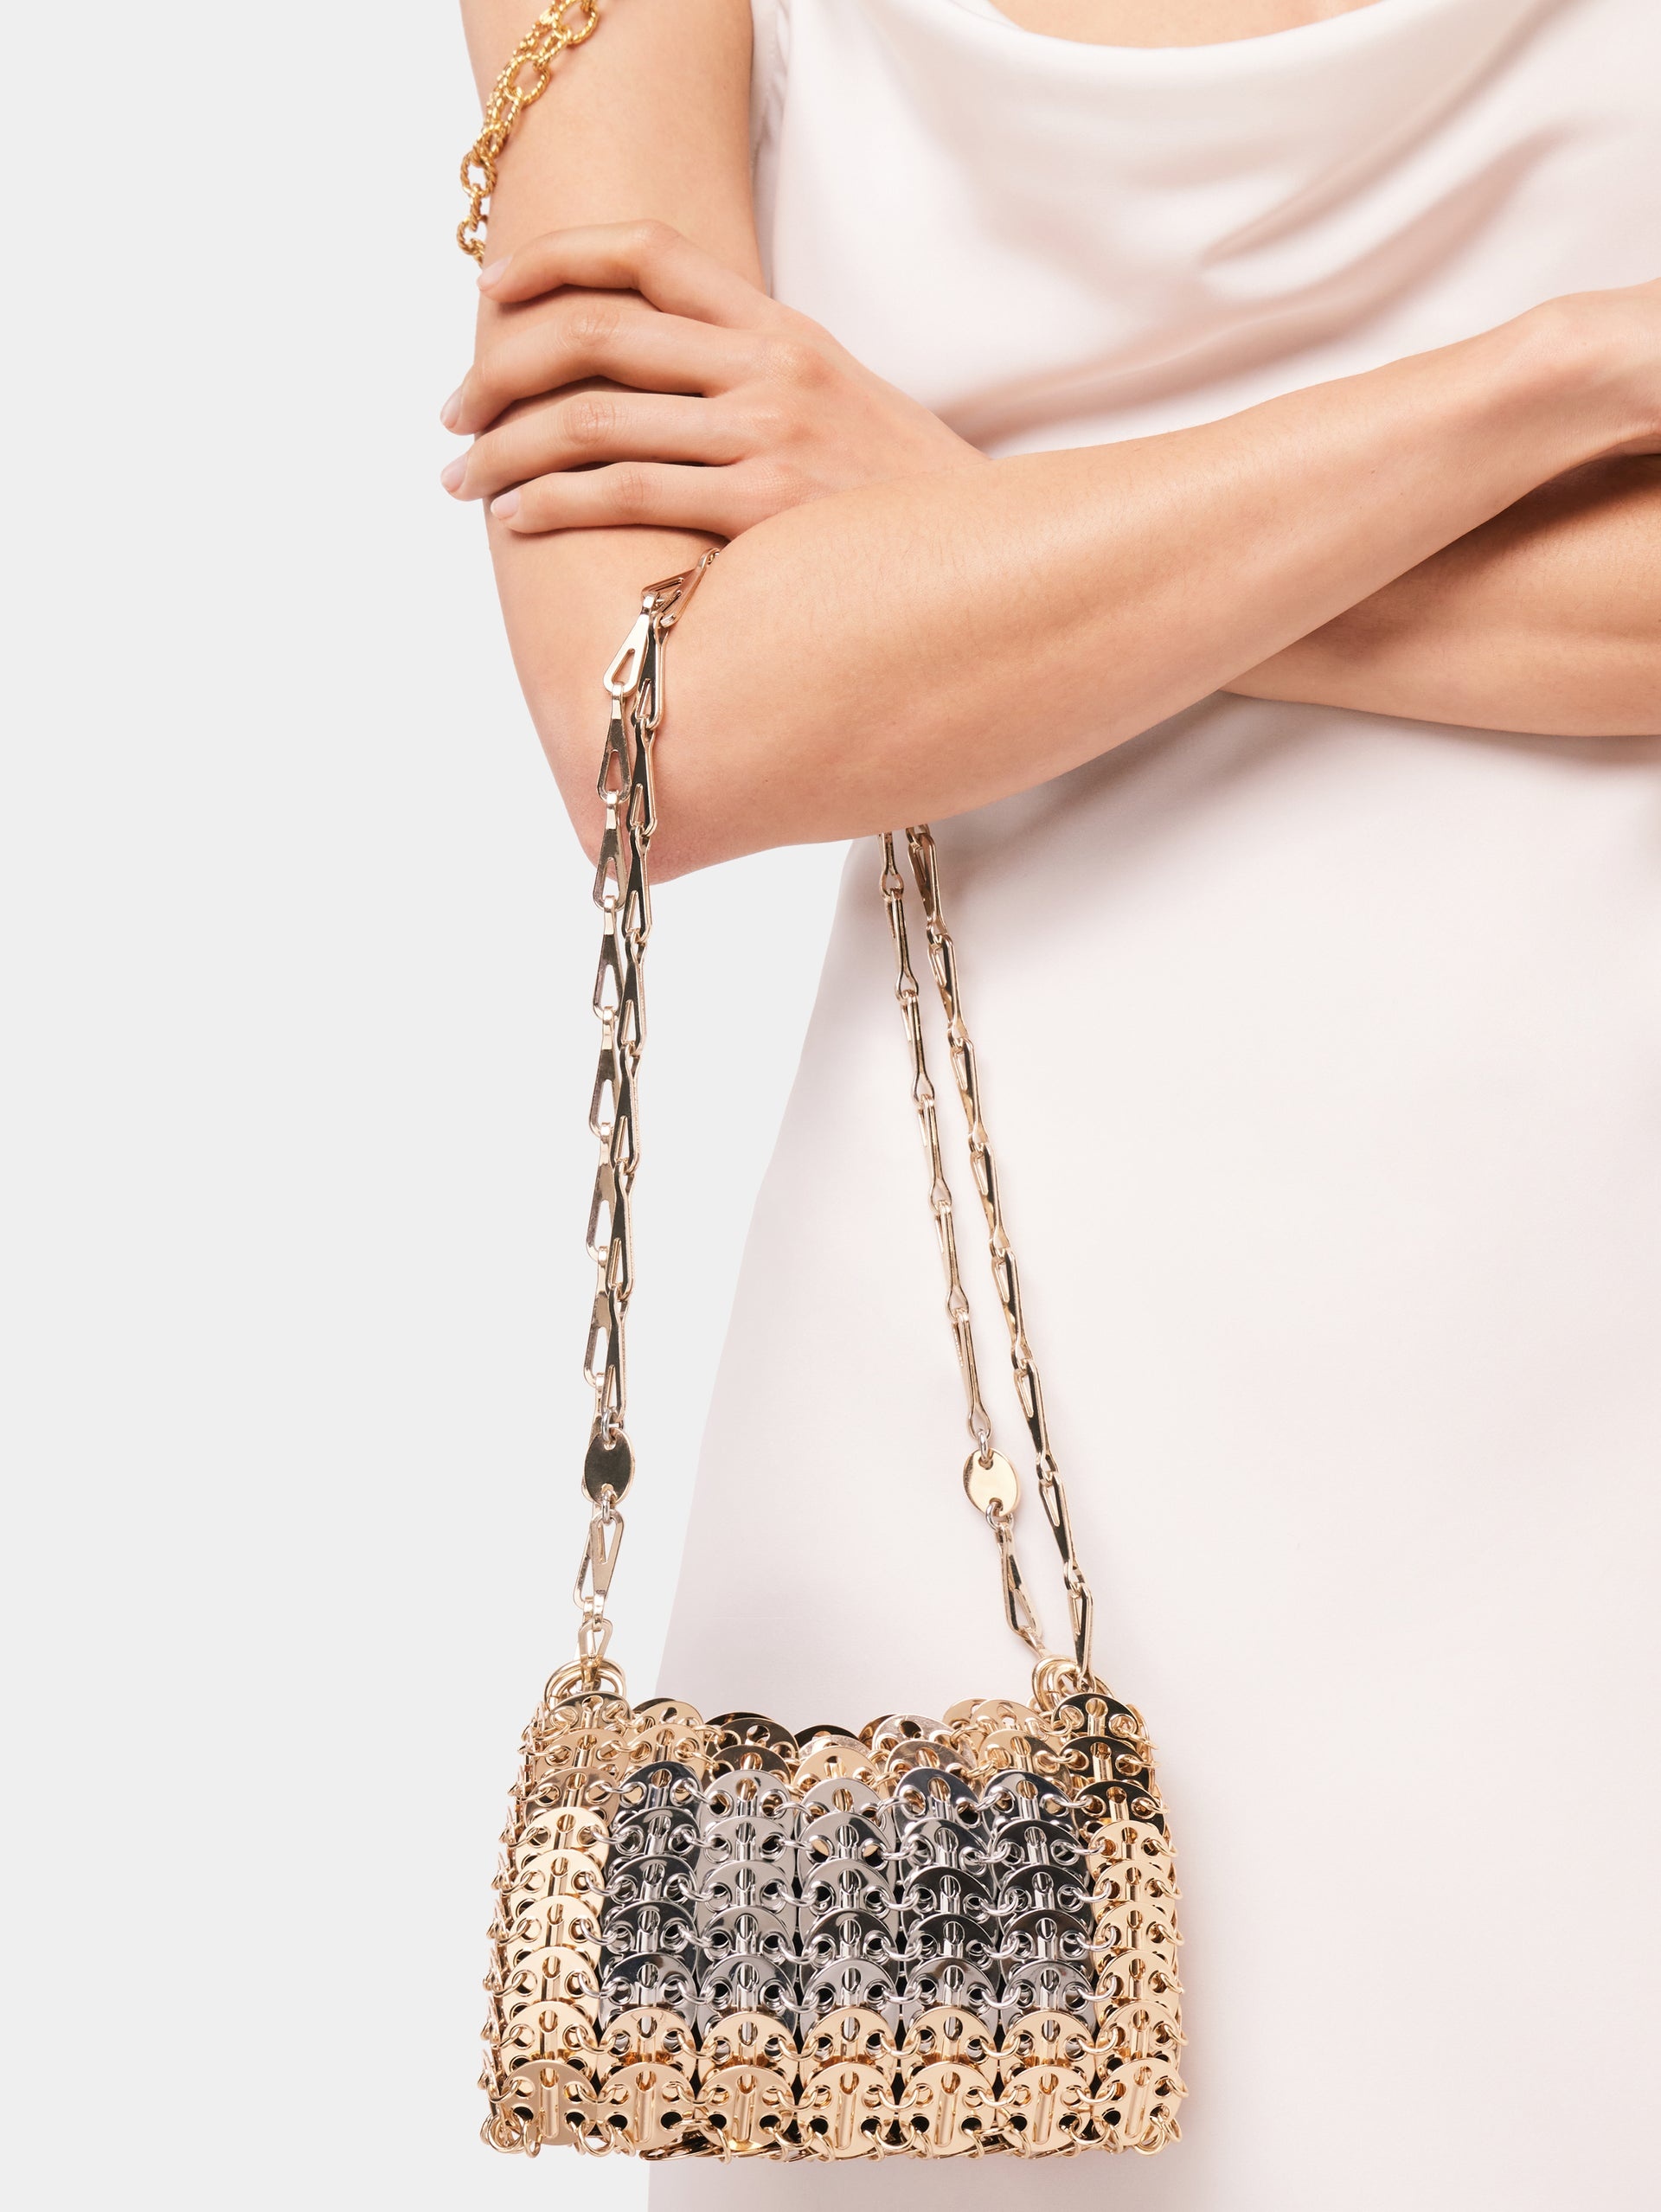 ICONIC GOLD AND SILVER NANO 1969 BAG - 4